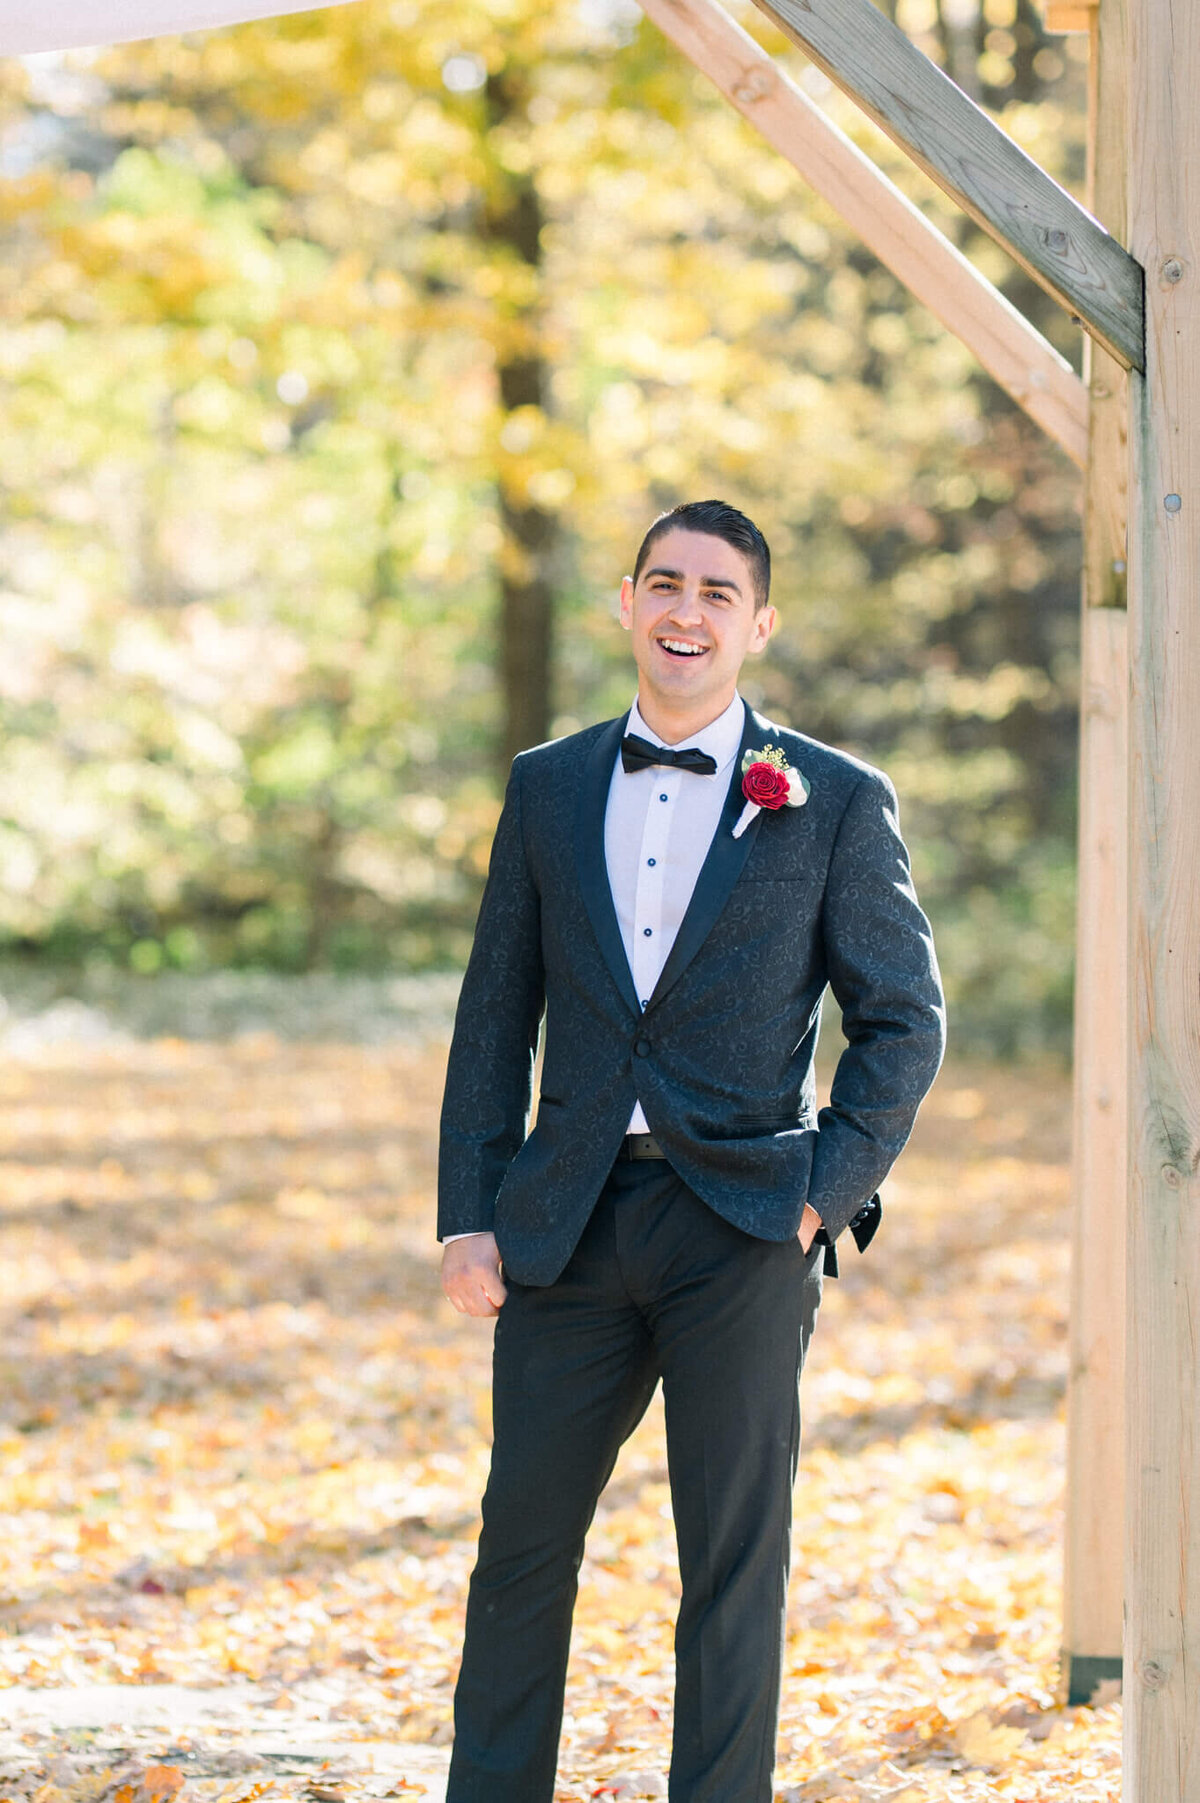 Groom with big smile on his face seeing his bride for the first time coming down the aisle